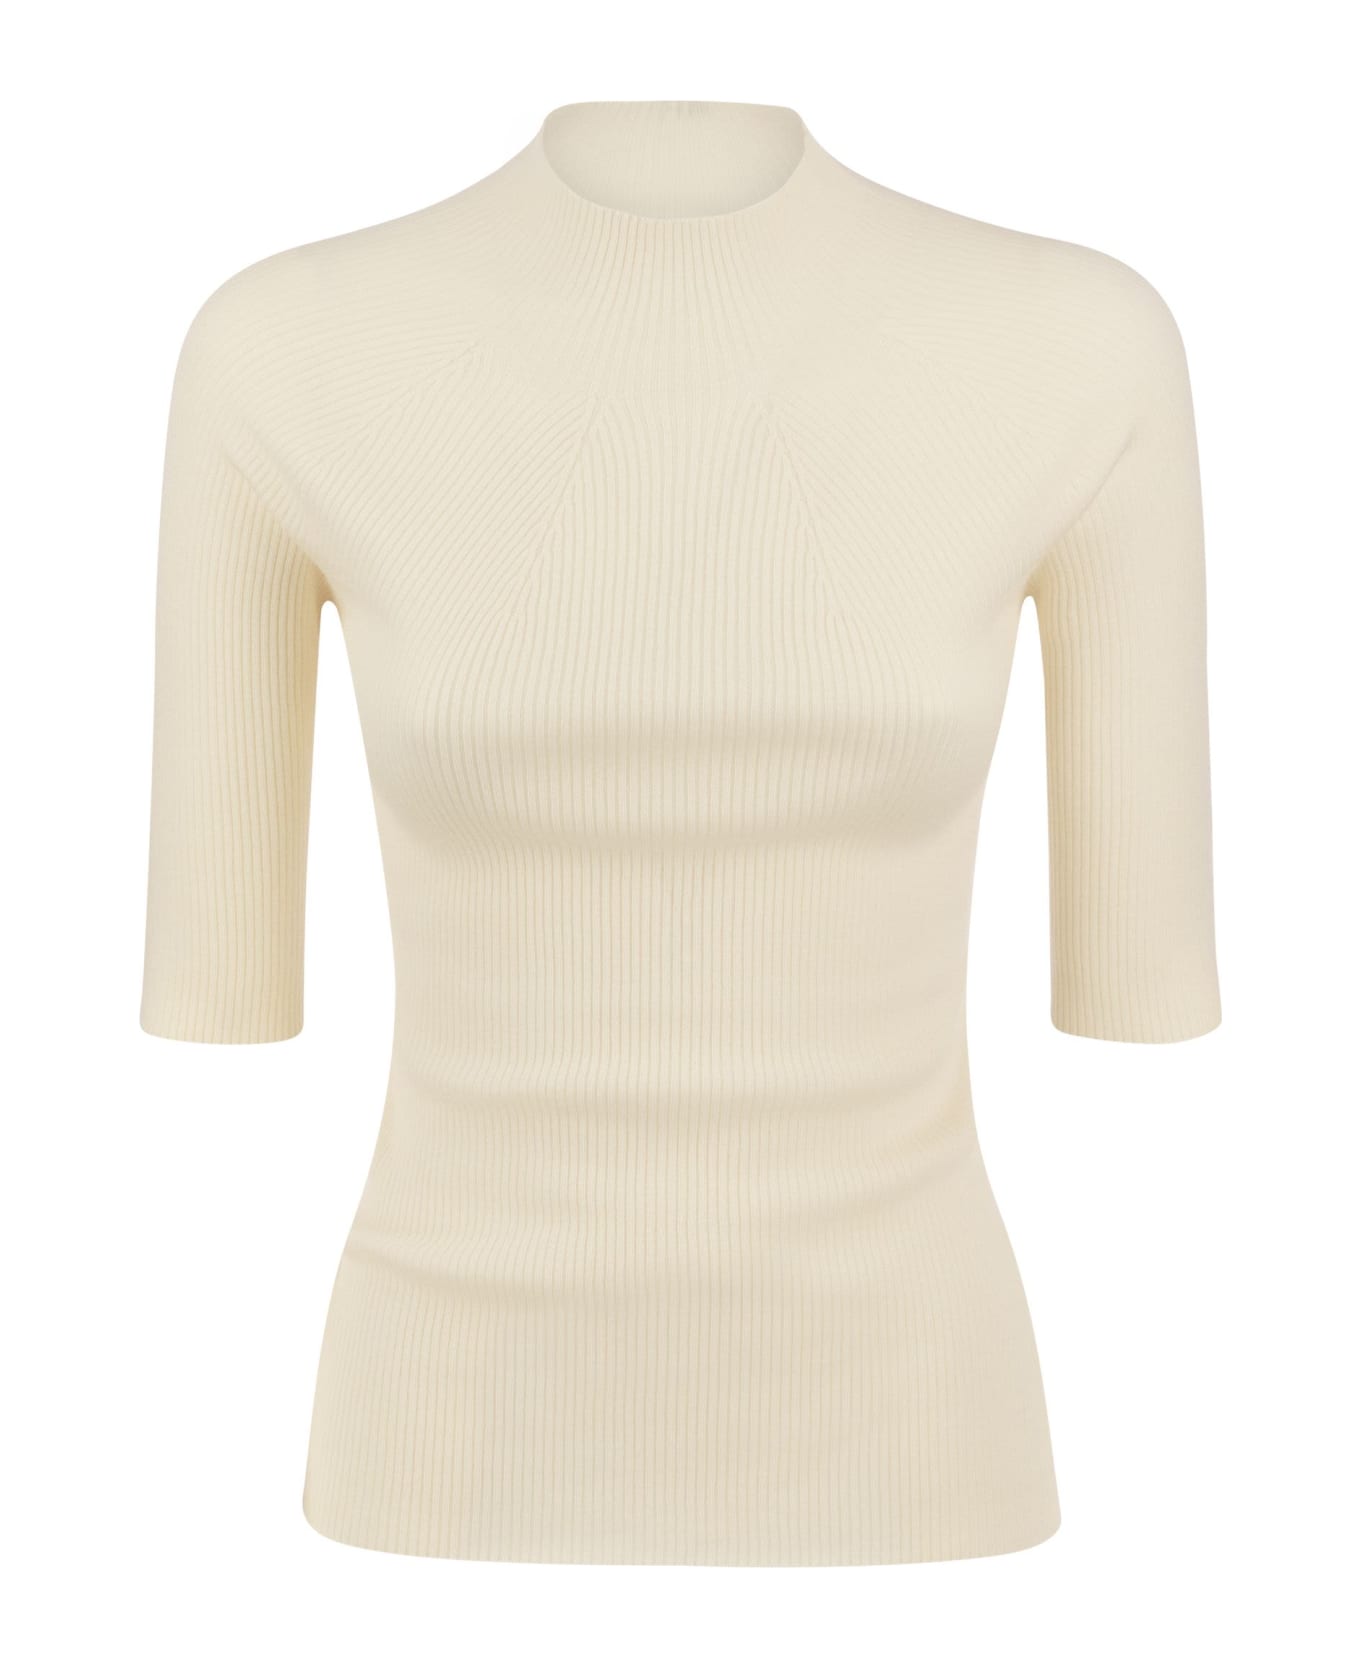 Peserico Tricot Jersey With Half Sleeves - Cream ニットウェア